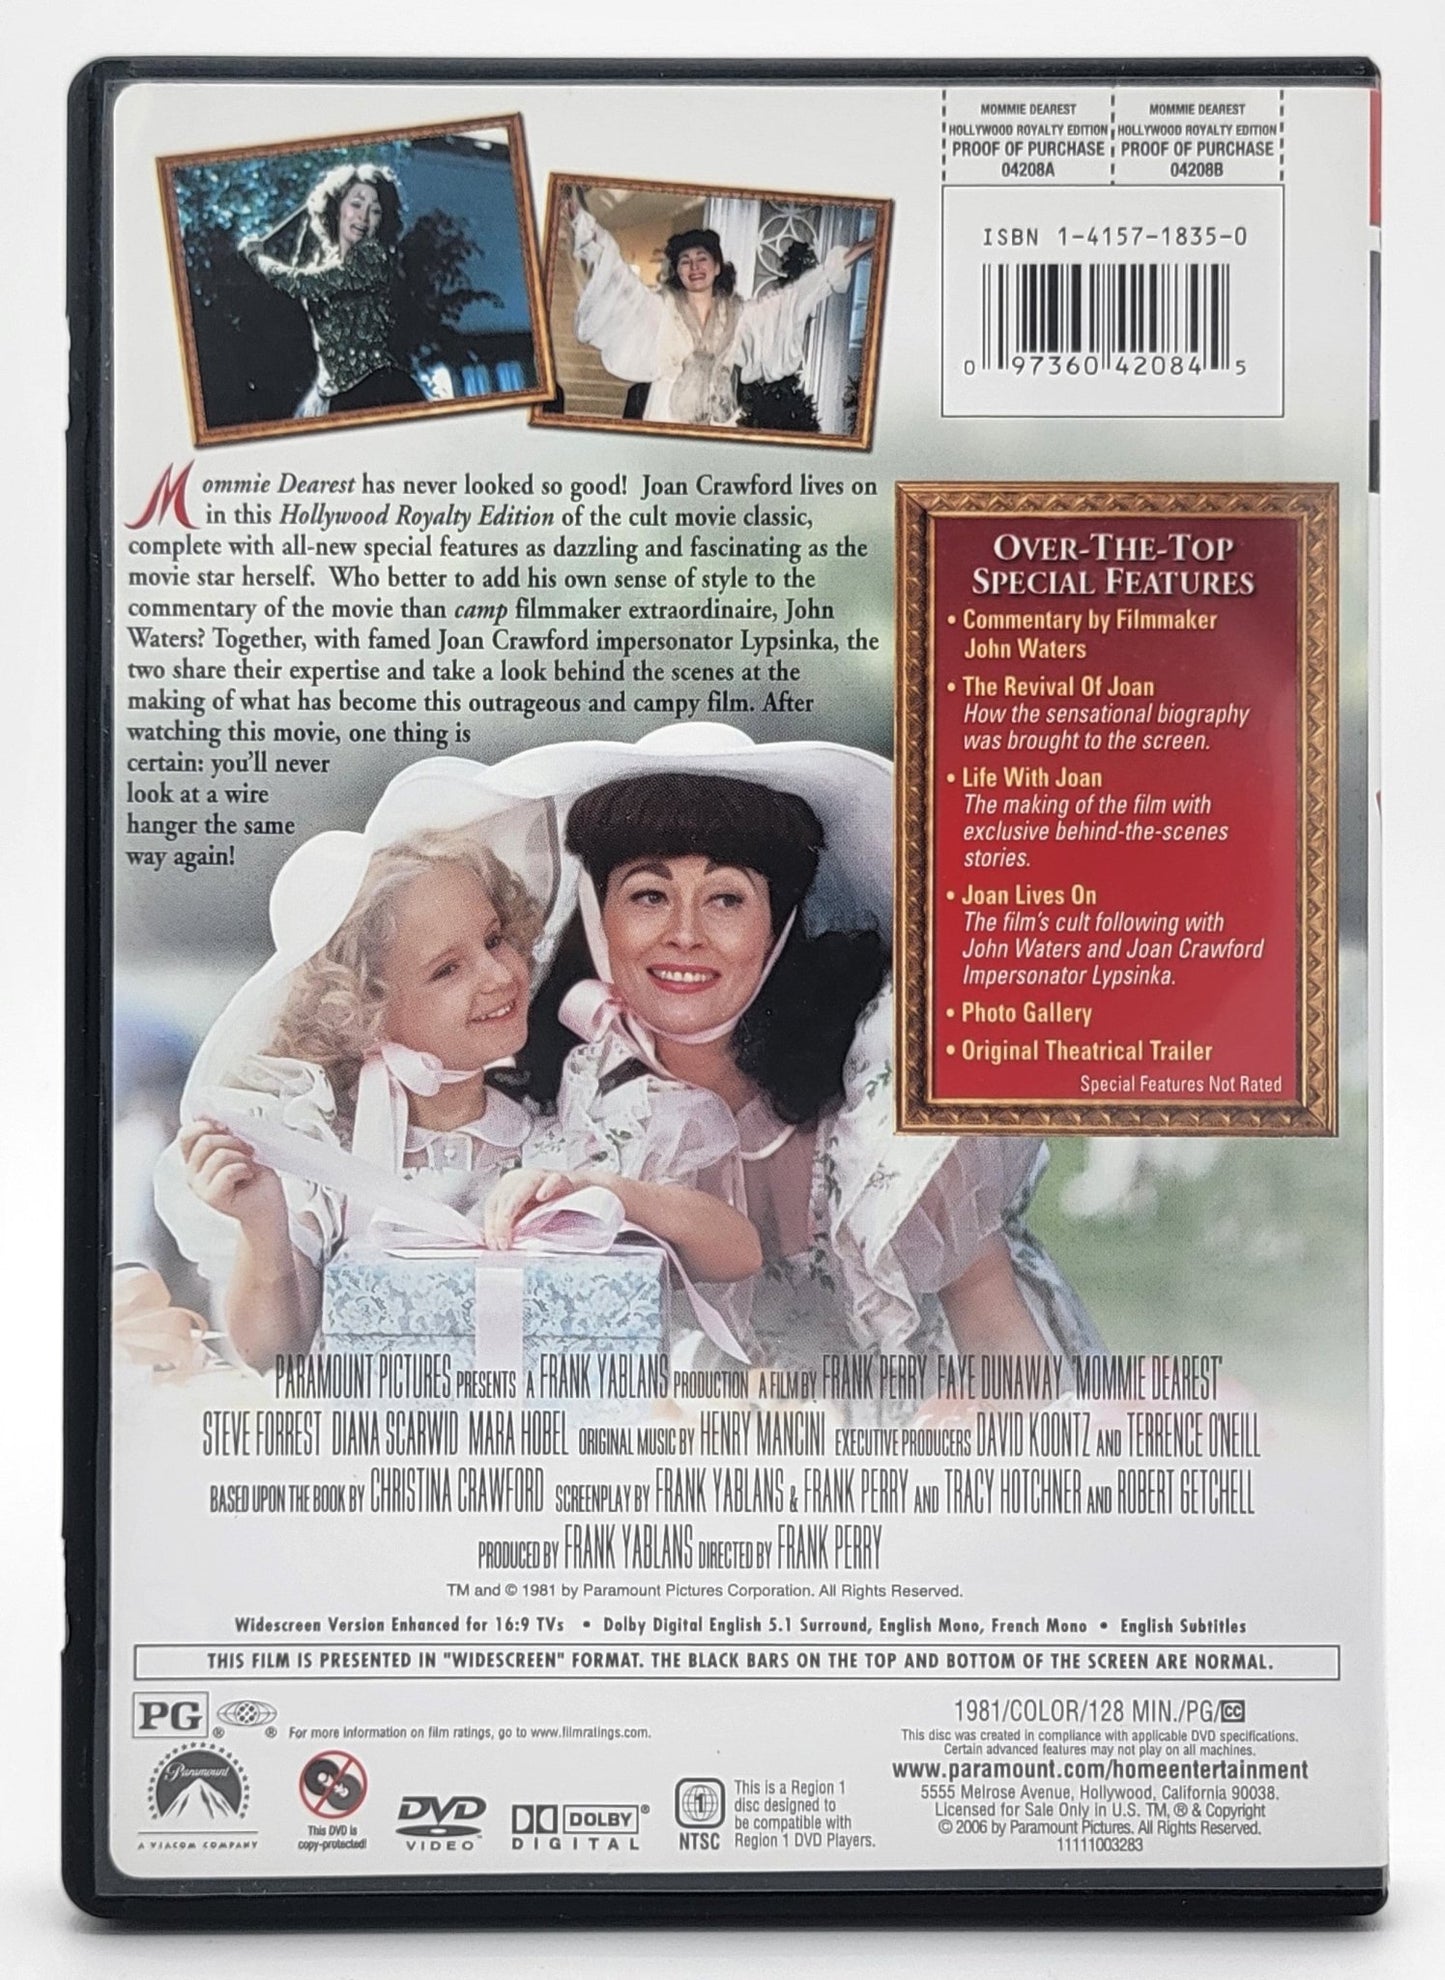 Paramount Pictures Home Entertainment - Mommie Dearest | DVD | Widescreen - Hollywood Royalty Edition - DVD - Steady Bunny Shop